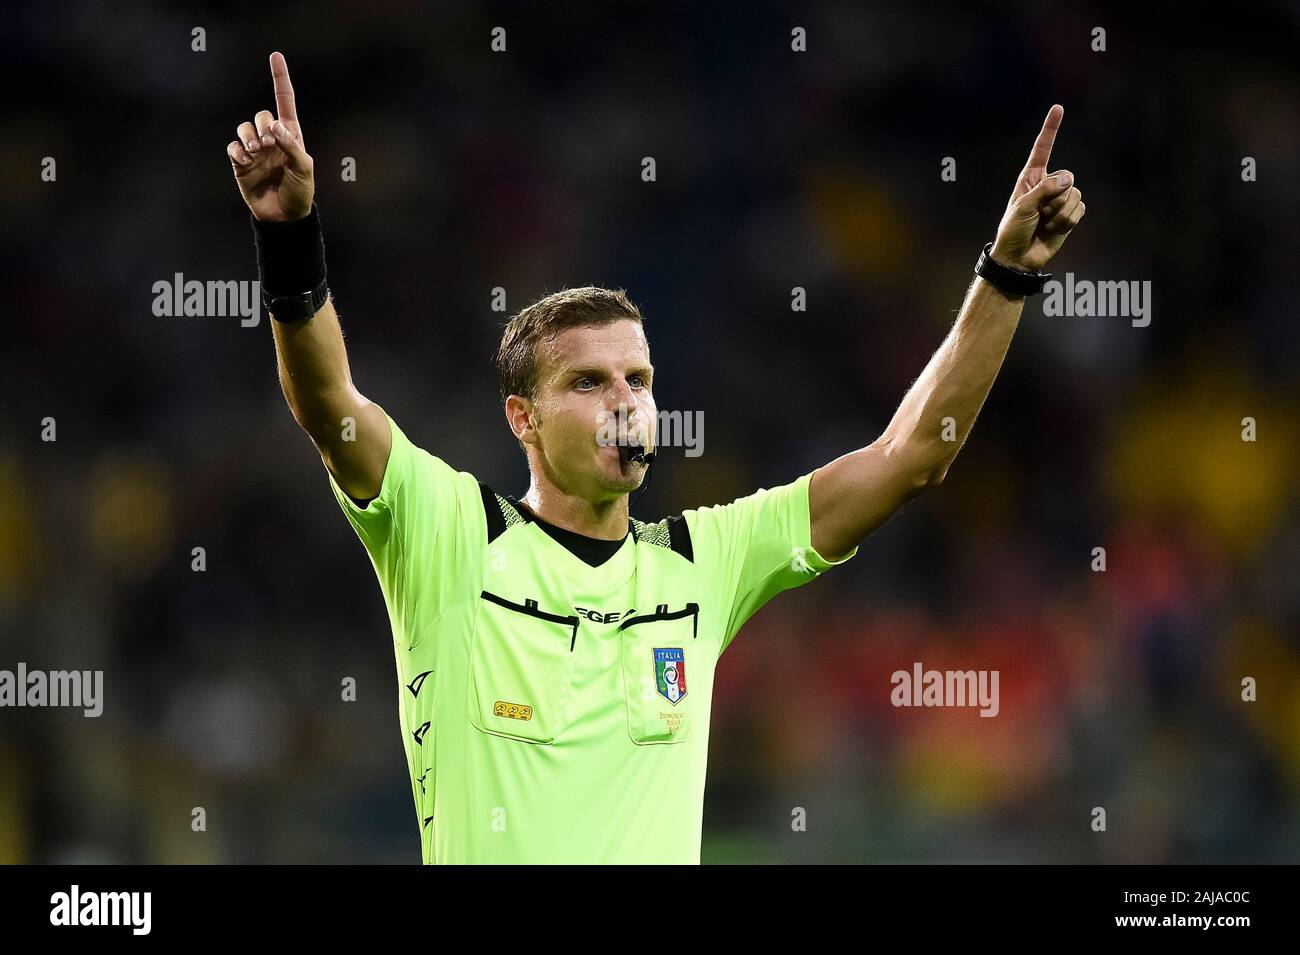 Parma, Italy. 30 September, 2019: Referee Federico La Penna calls for VAR (Video Assistant Referee) during the Serie A football match between Parma Calcio and Torino FC. Parma Calcio won 3-2 over Torino FC. Credit: Nicolò Campo/Alamy Live News Stock Photo